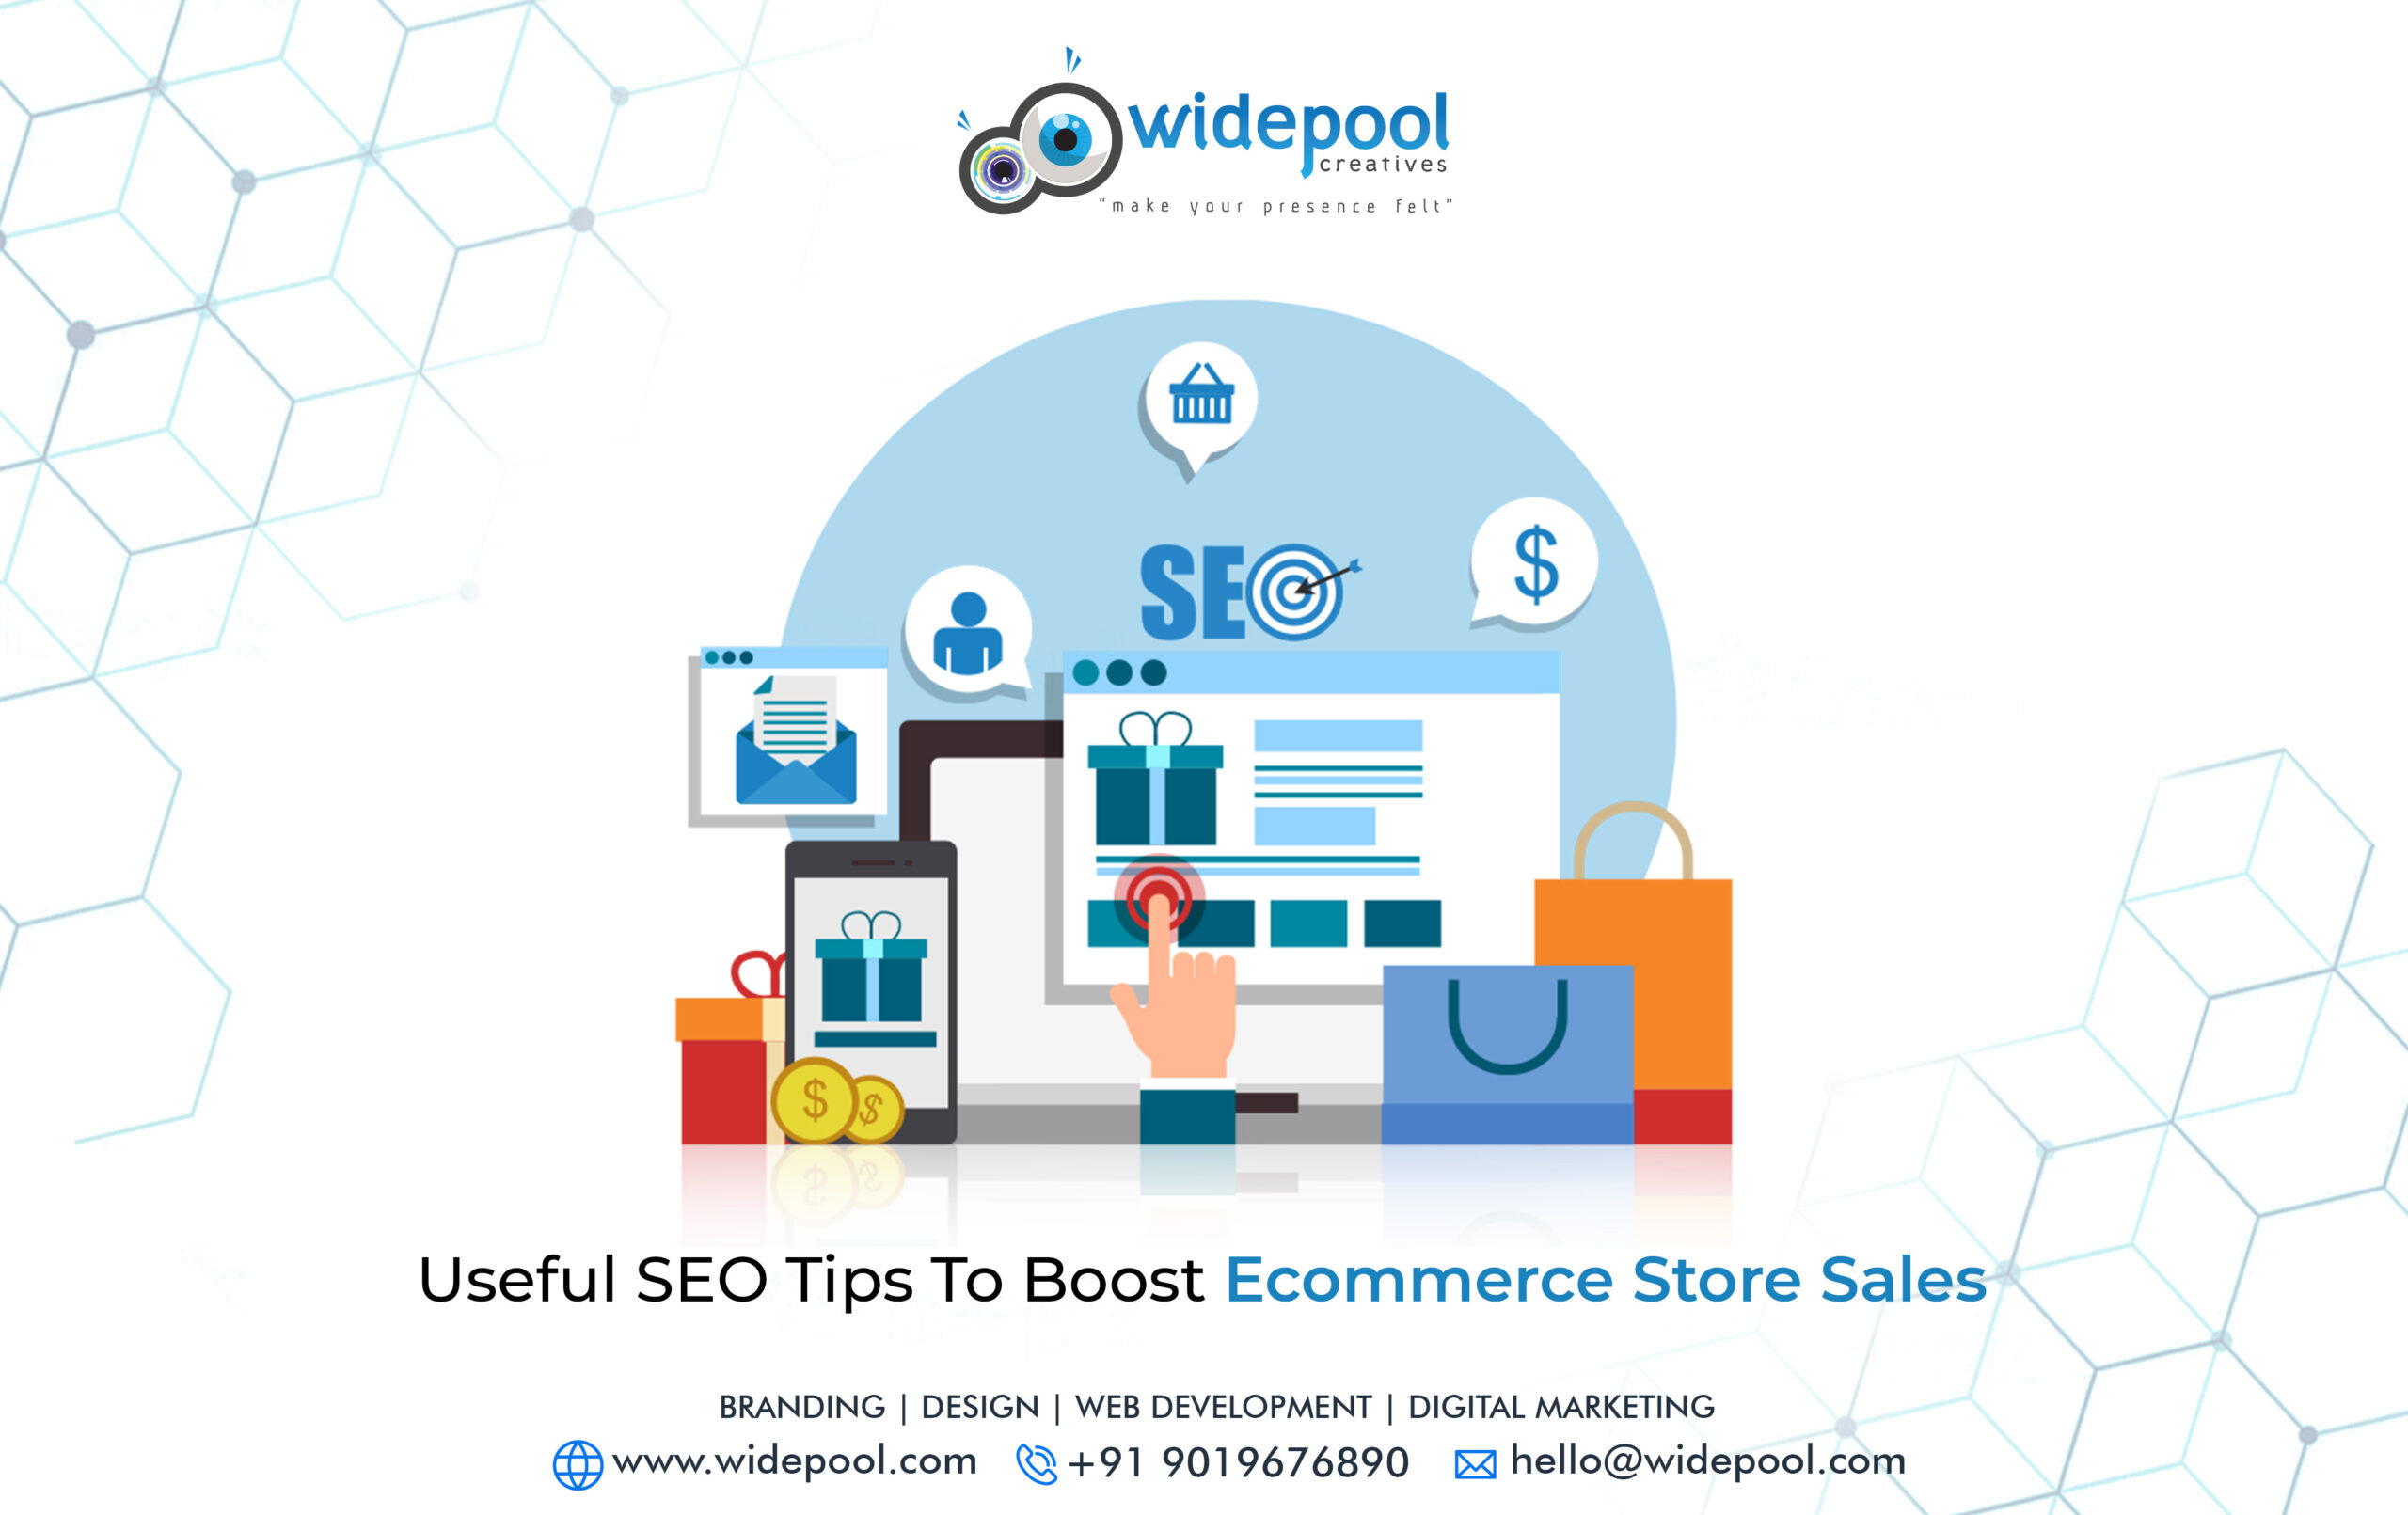 Useful SEO Tips to Boost Ecommerce Store Sales